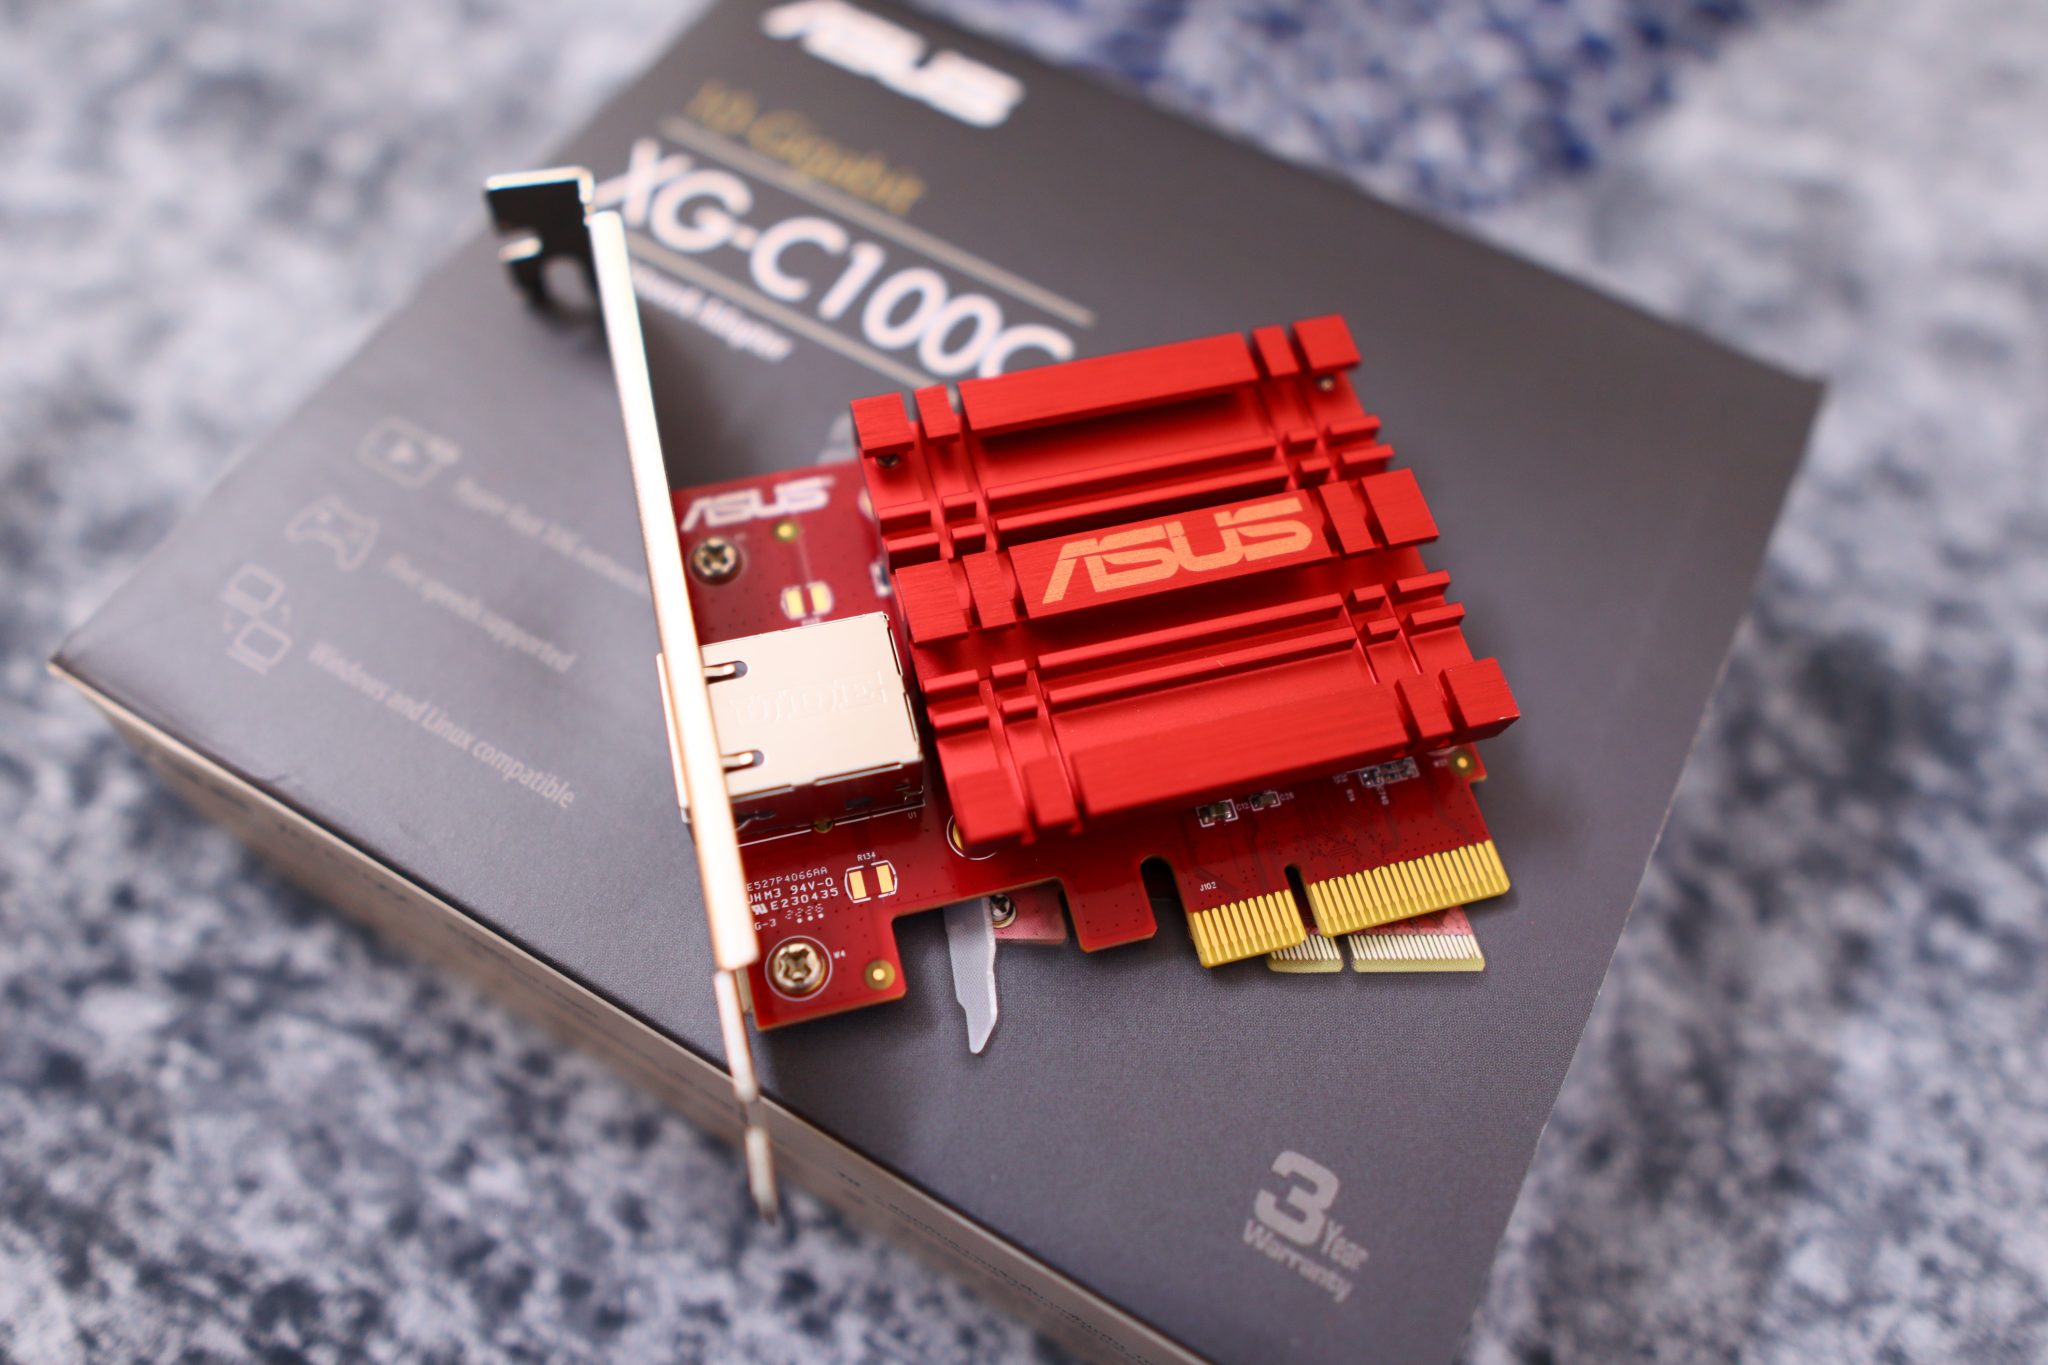 PCIe ASUS network card placed on top of its box